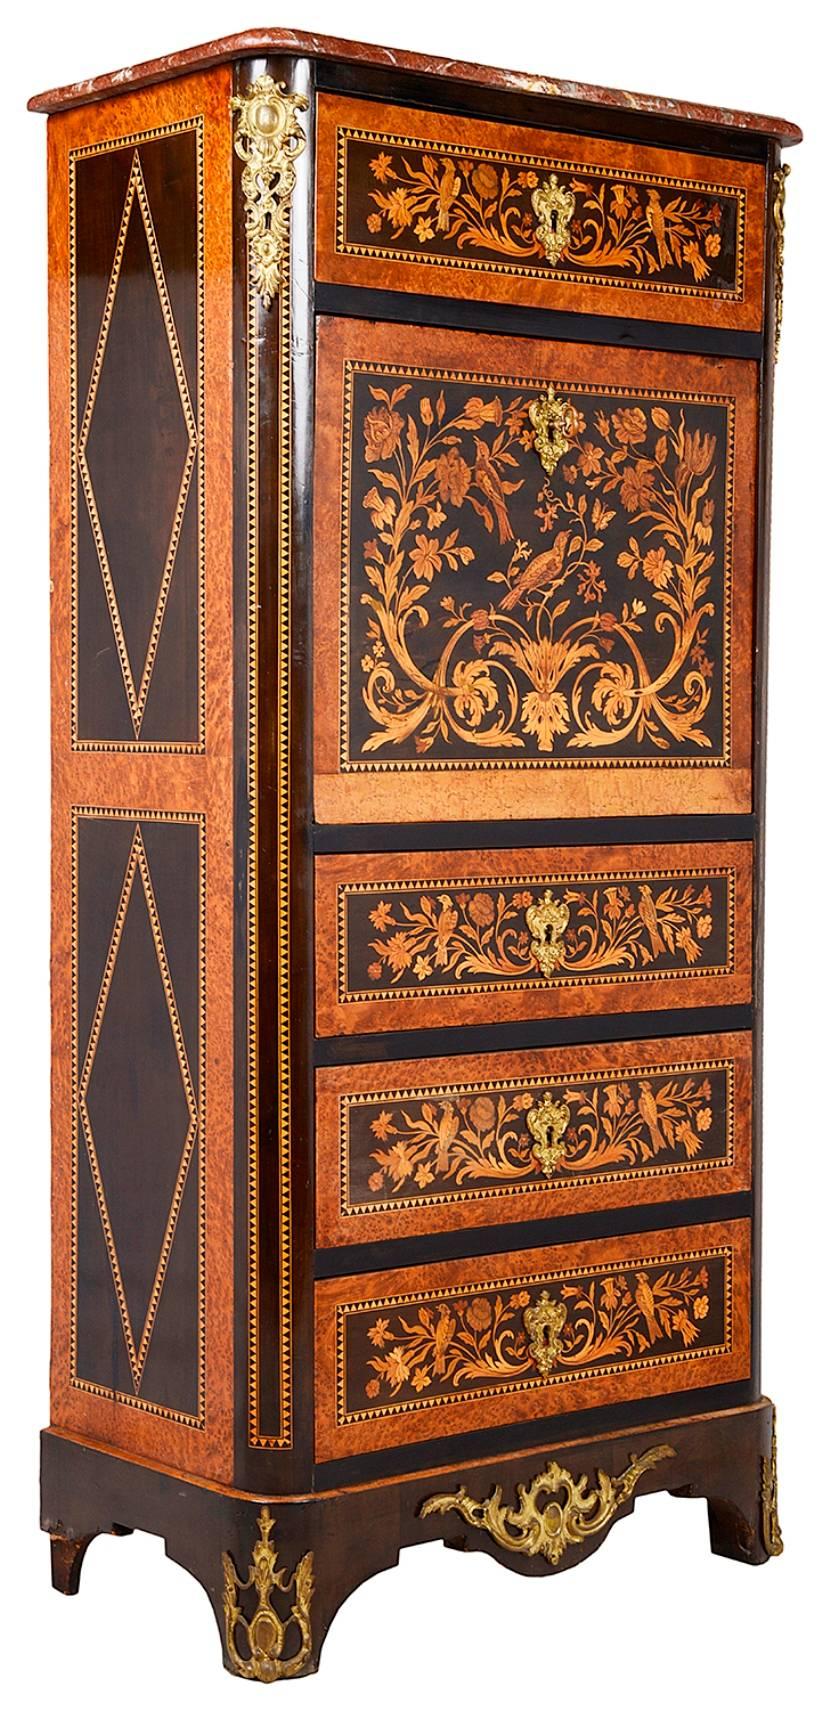 A good quality Louis XVI style marquetry inlaid Secretaire Abattant. Having a Rouge marble top, profuse scrolling floral inlay to the front. A single drawer to the top, the fall front opening to reveal fitted inlaid drawers and an inset writing